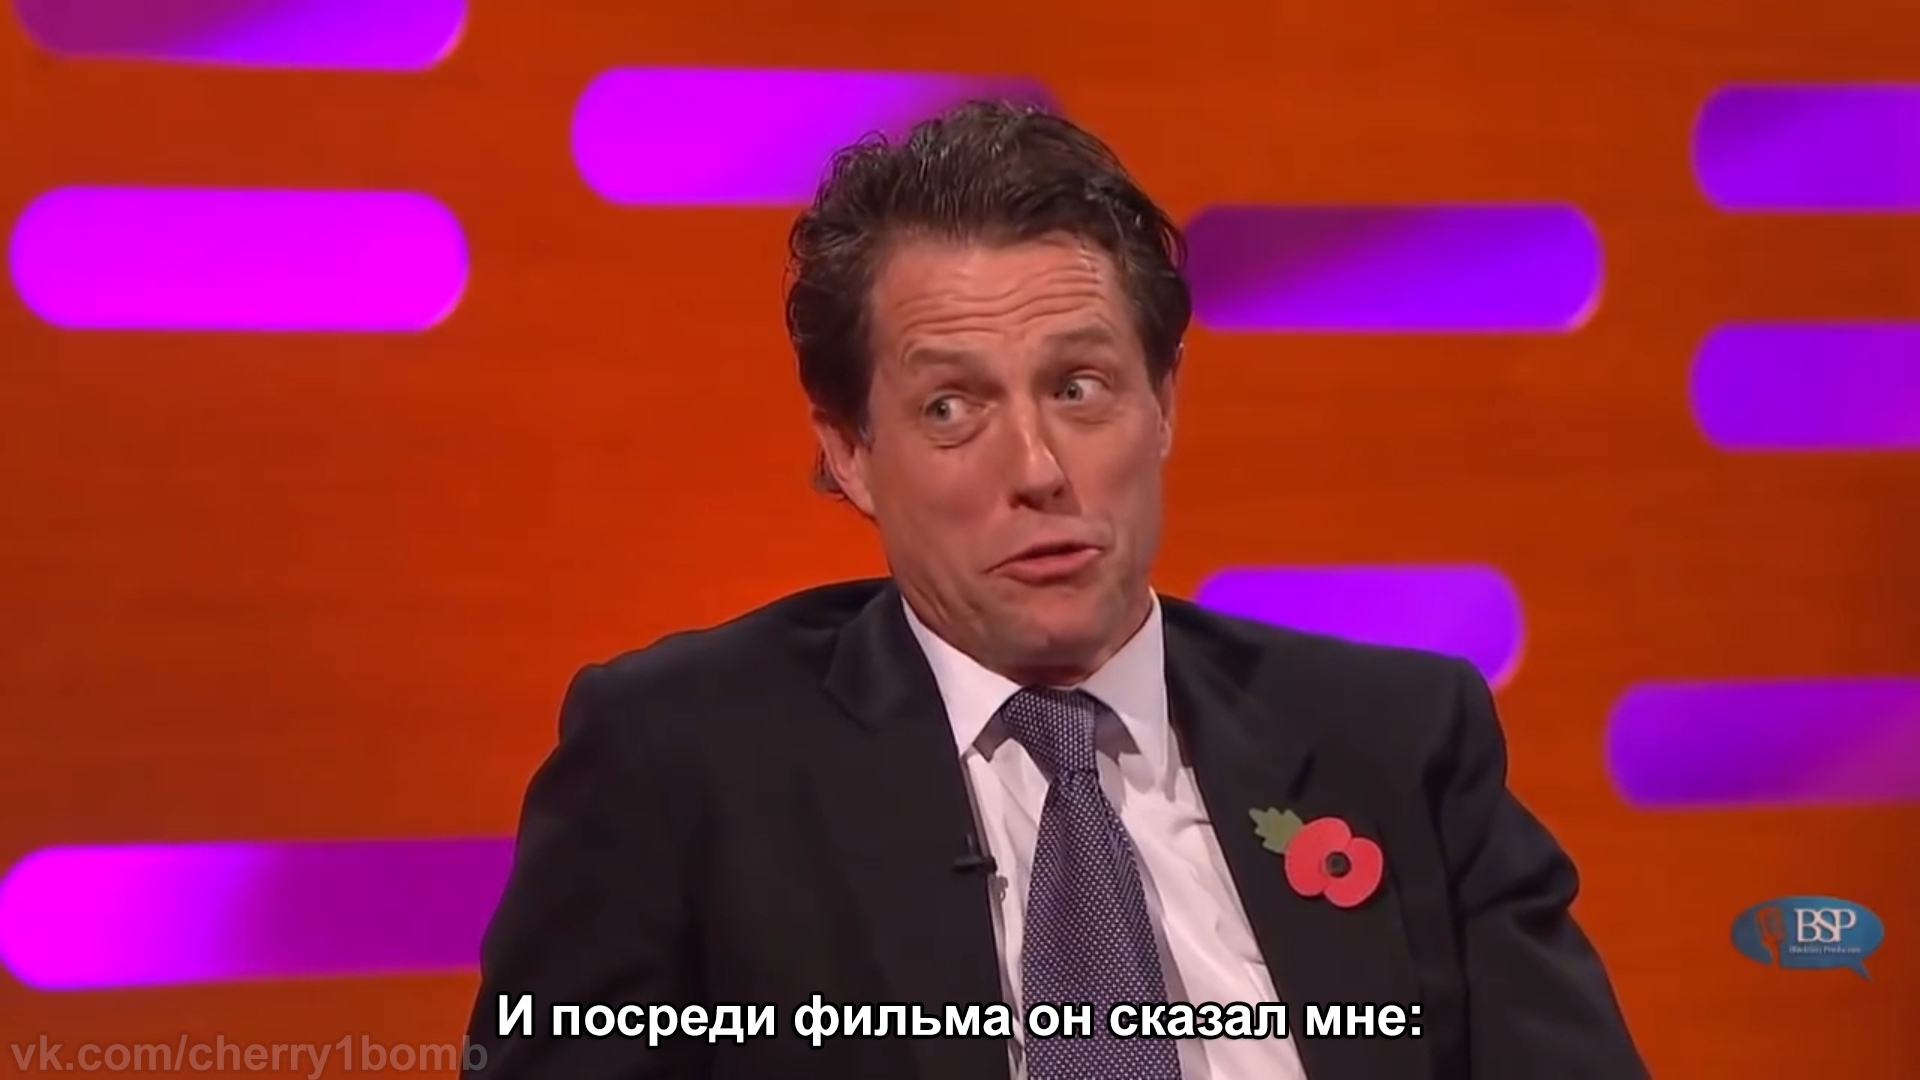 It came out awkward - Hugh Grant, Actors and actresses, Celebrities, Storyboard, Paddington, The Graham Norton Show, Father, Humor, , From the network, Longpost